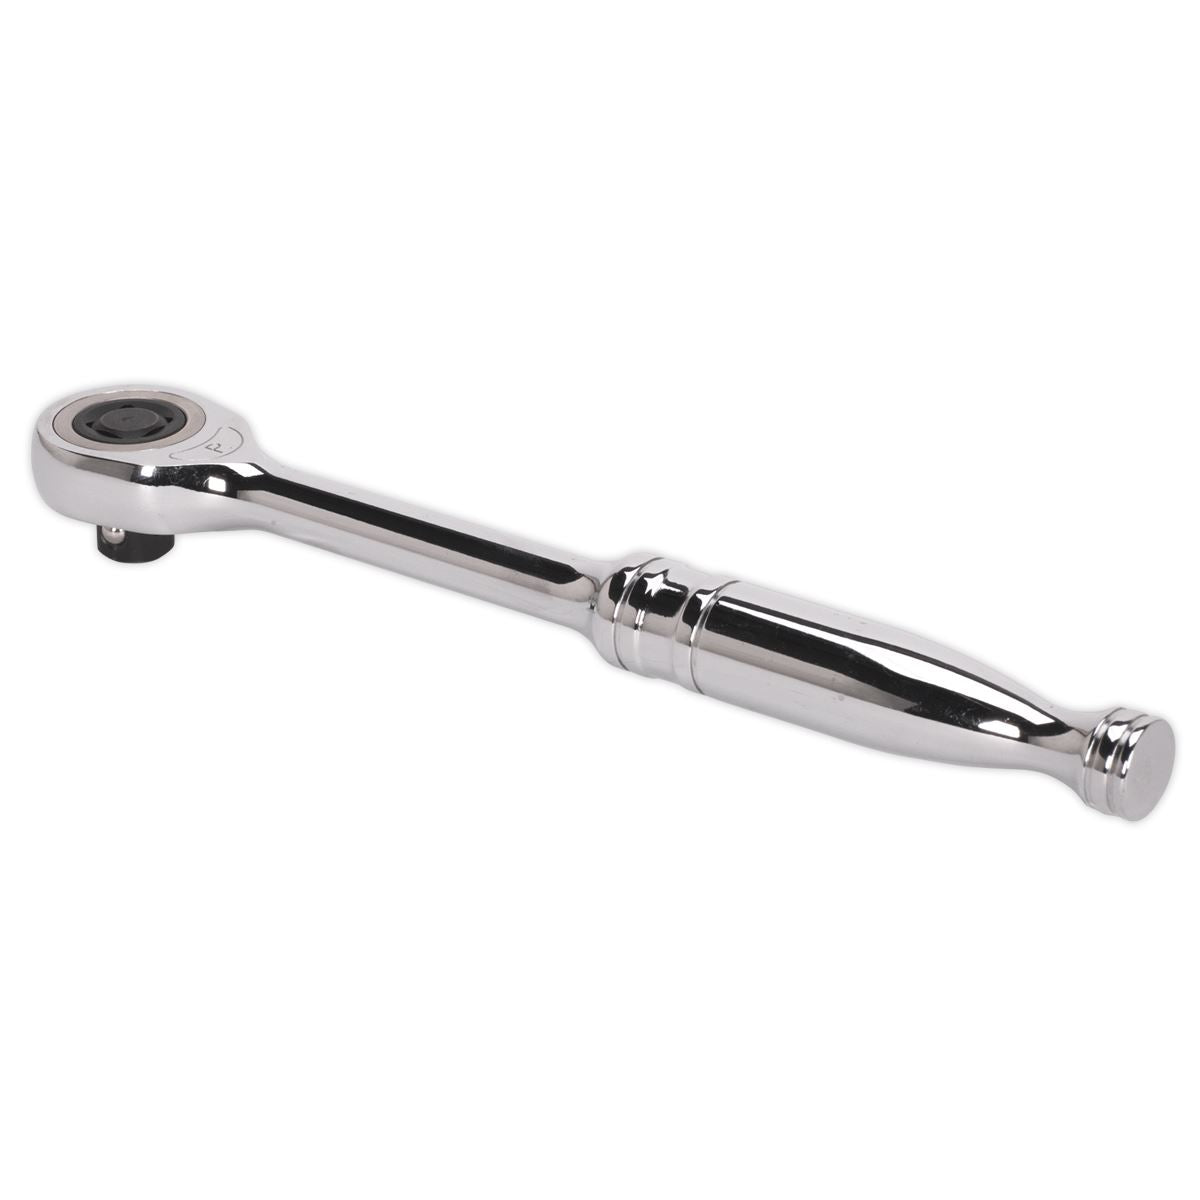 Sealey Premier Gearless Ratchet Wrench 3/8"Sq Drive - Push-Through Reverse